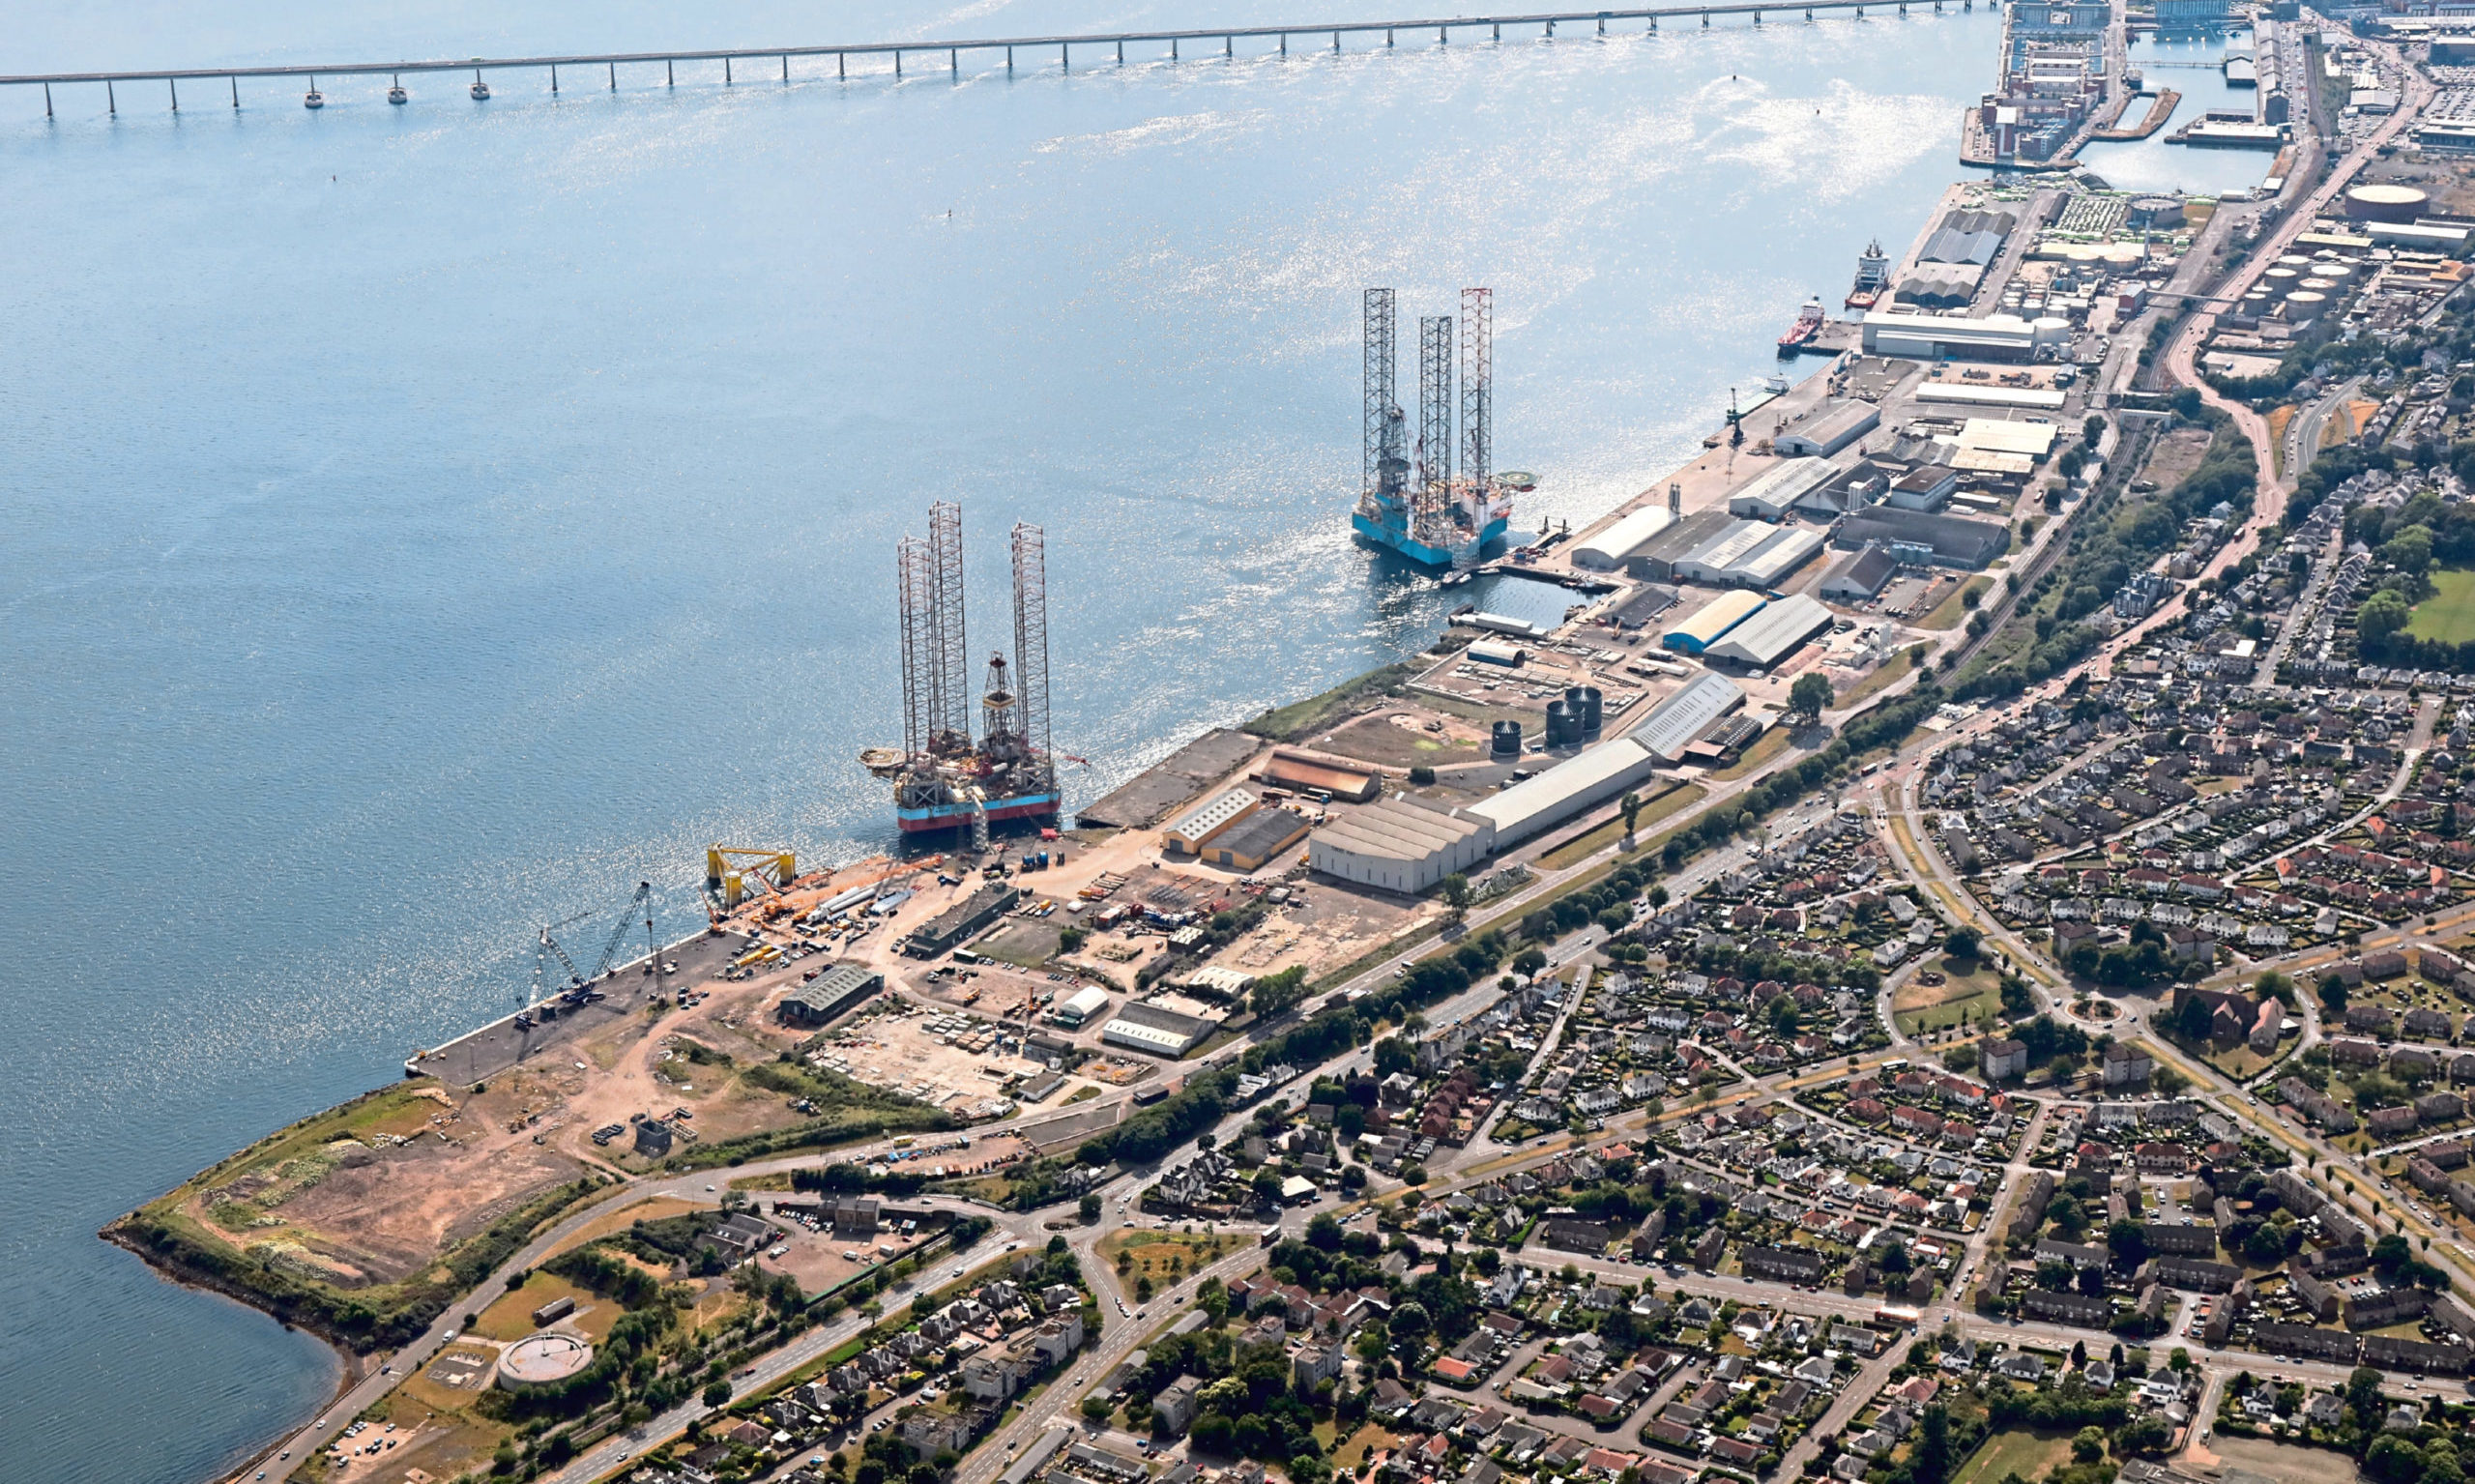 An aerial view of the Port of Dundee